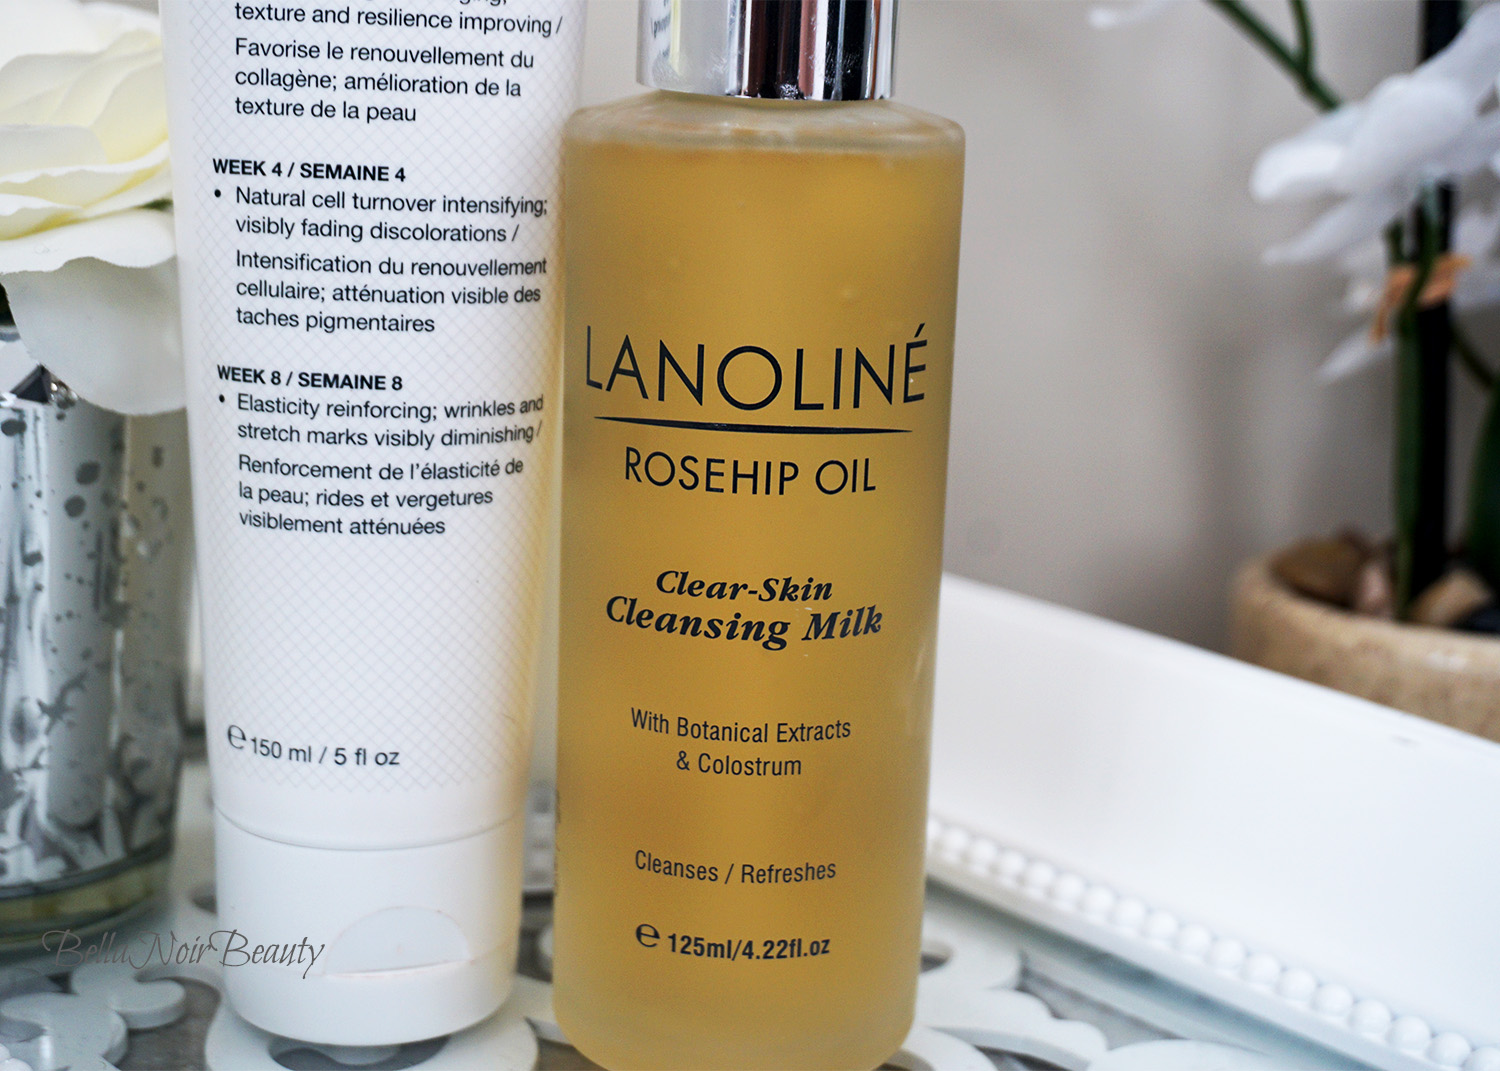 Strivectin Intensive Concentrate, Lanoline Rosehip Oil Cleansing Milk